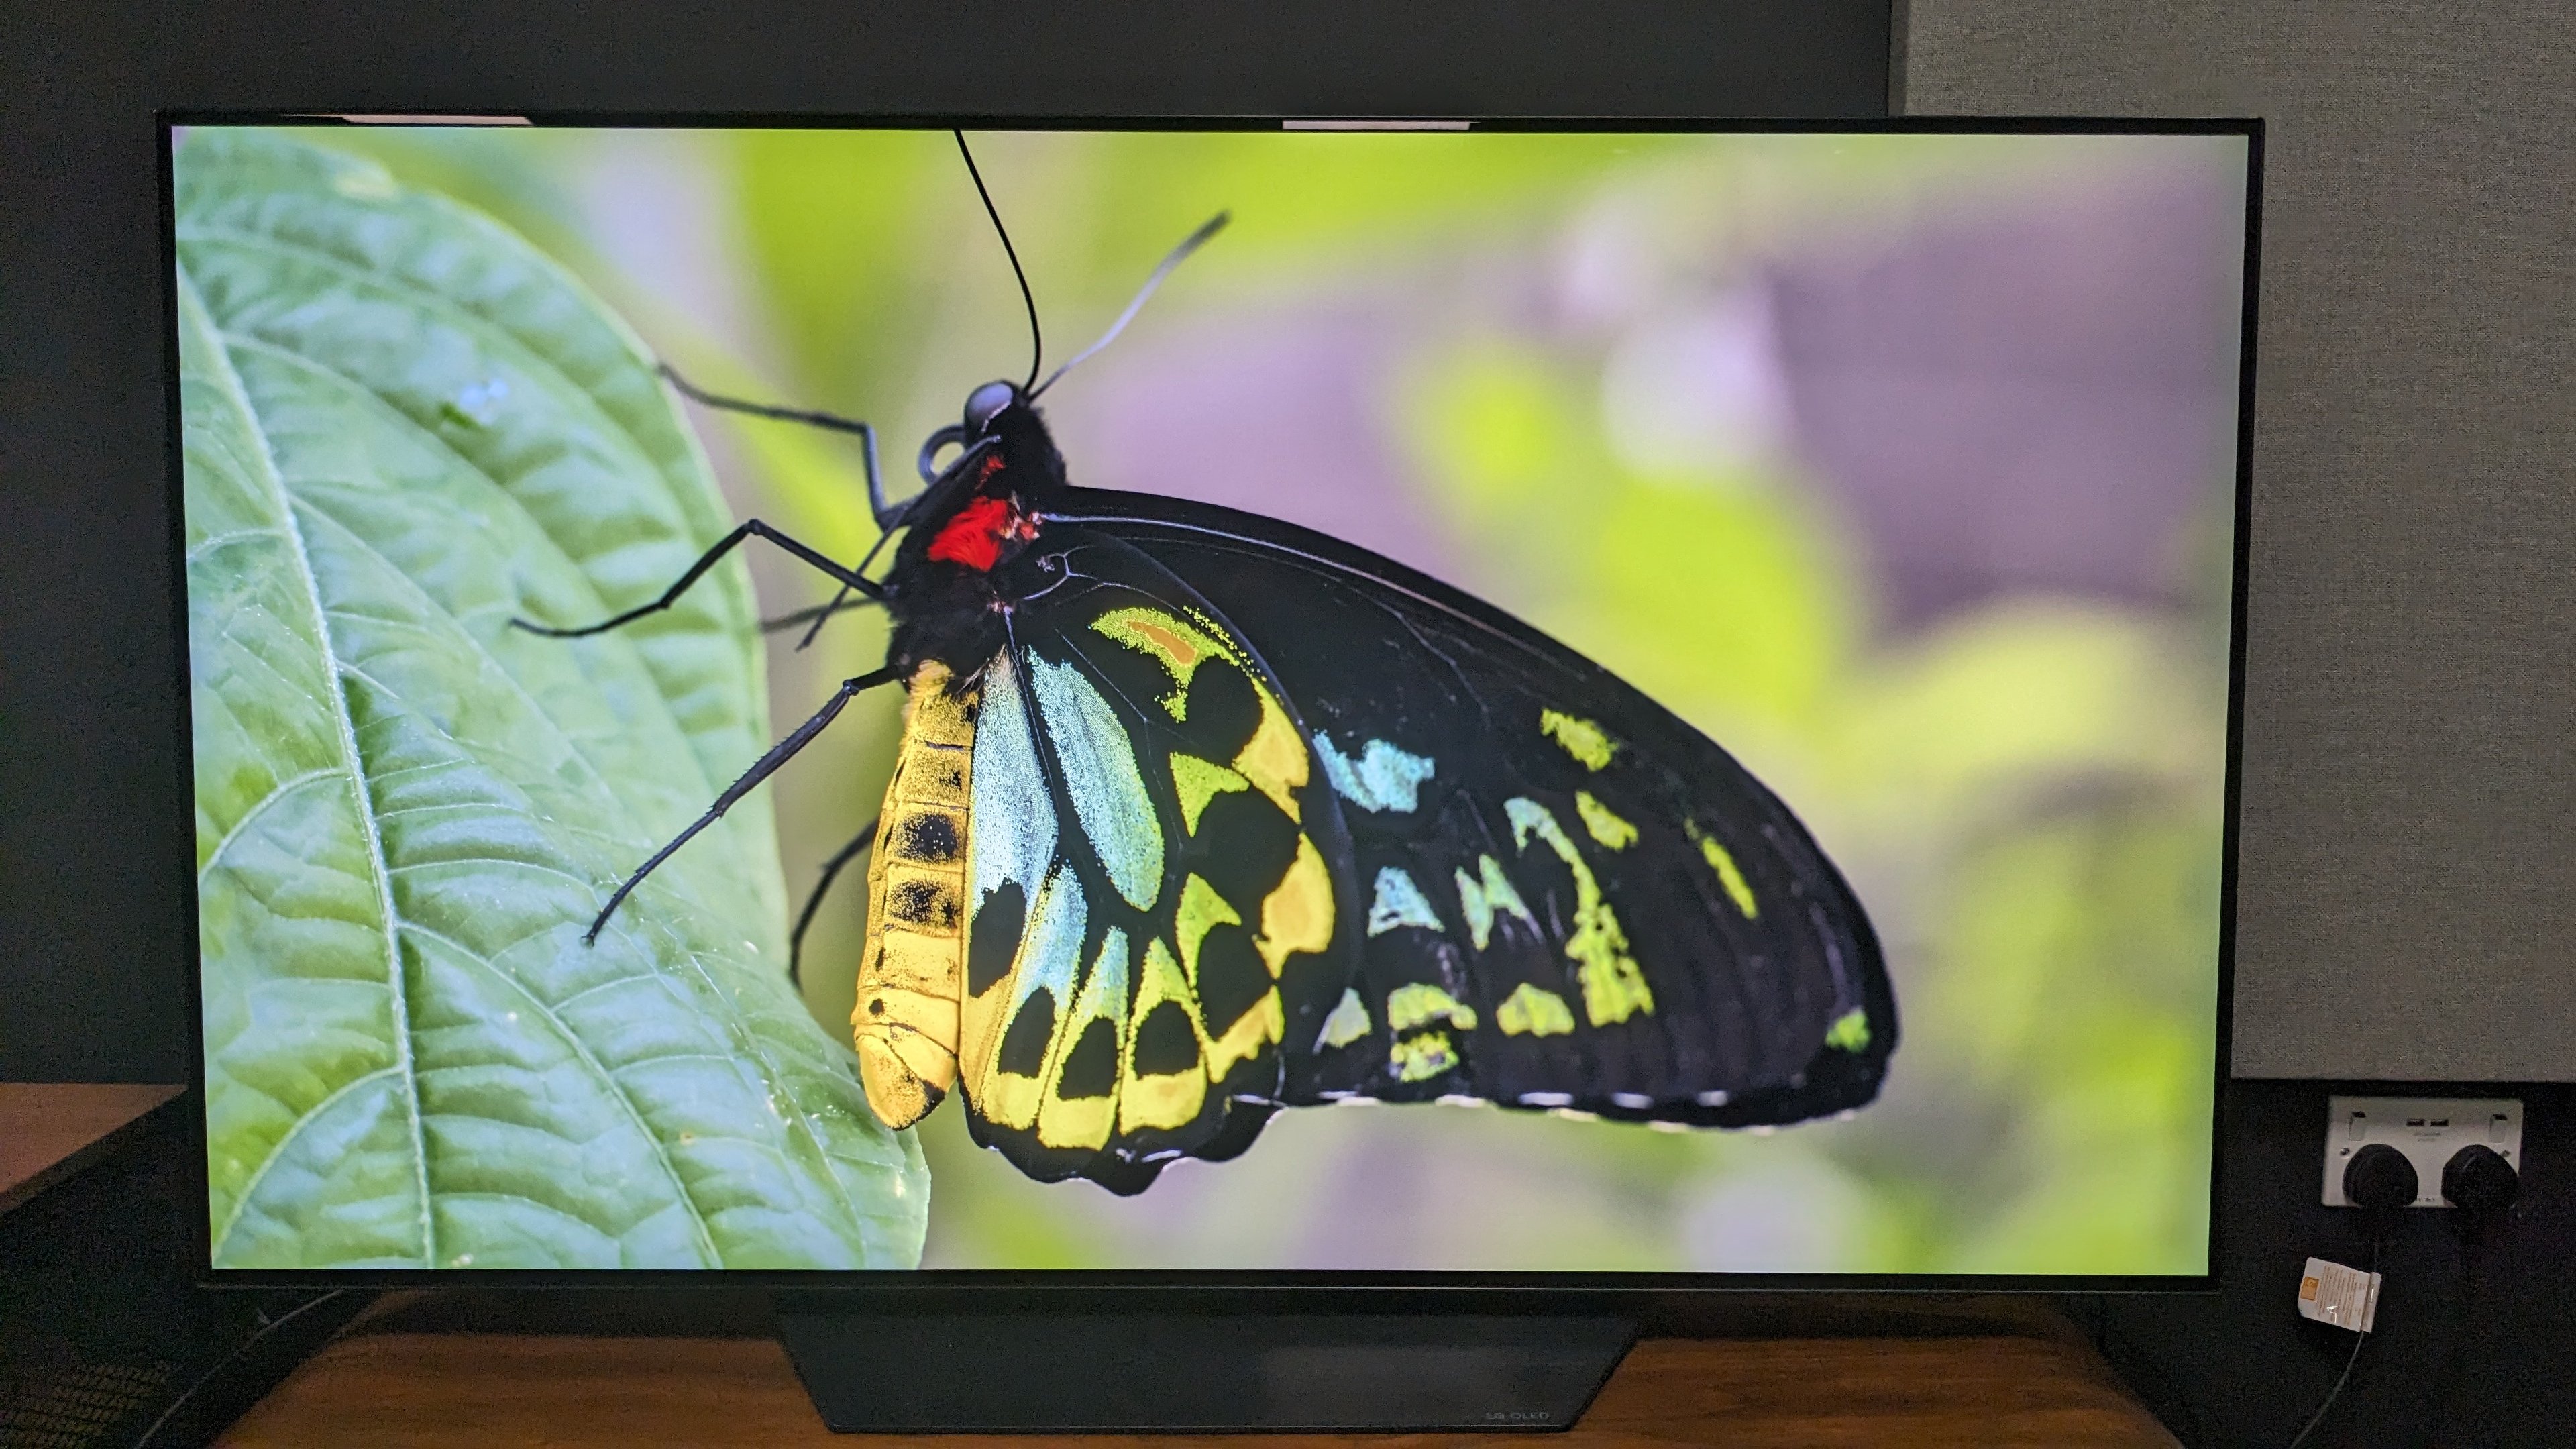 LG B3 TV with green butterfly on screen